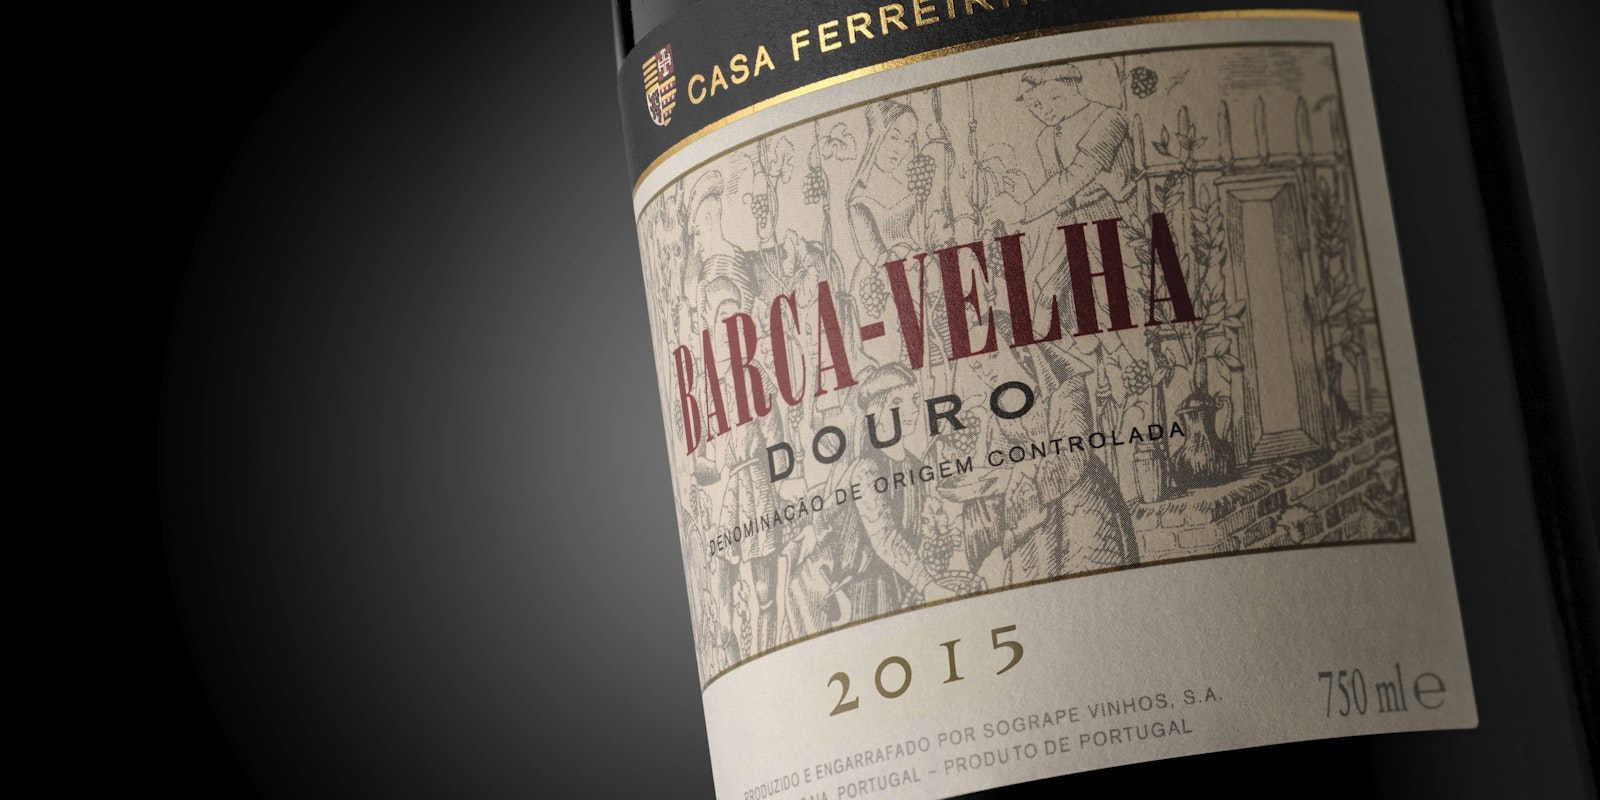 An emblematic Douro wine